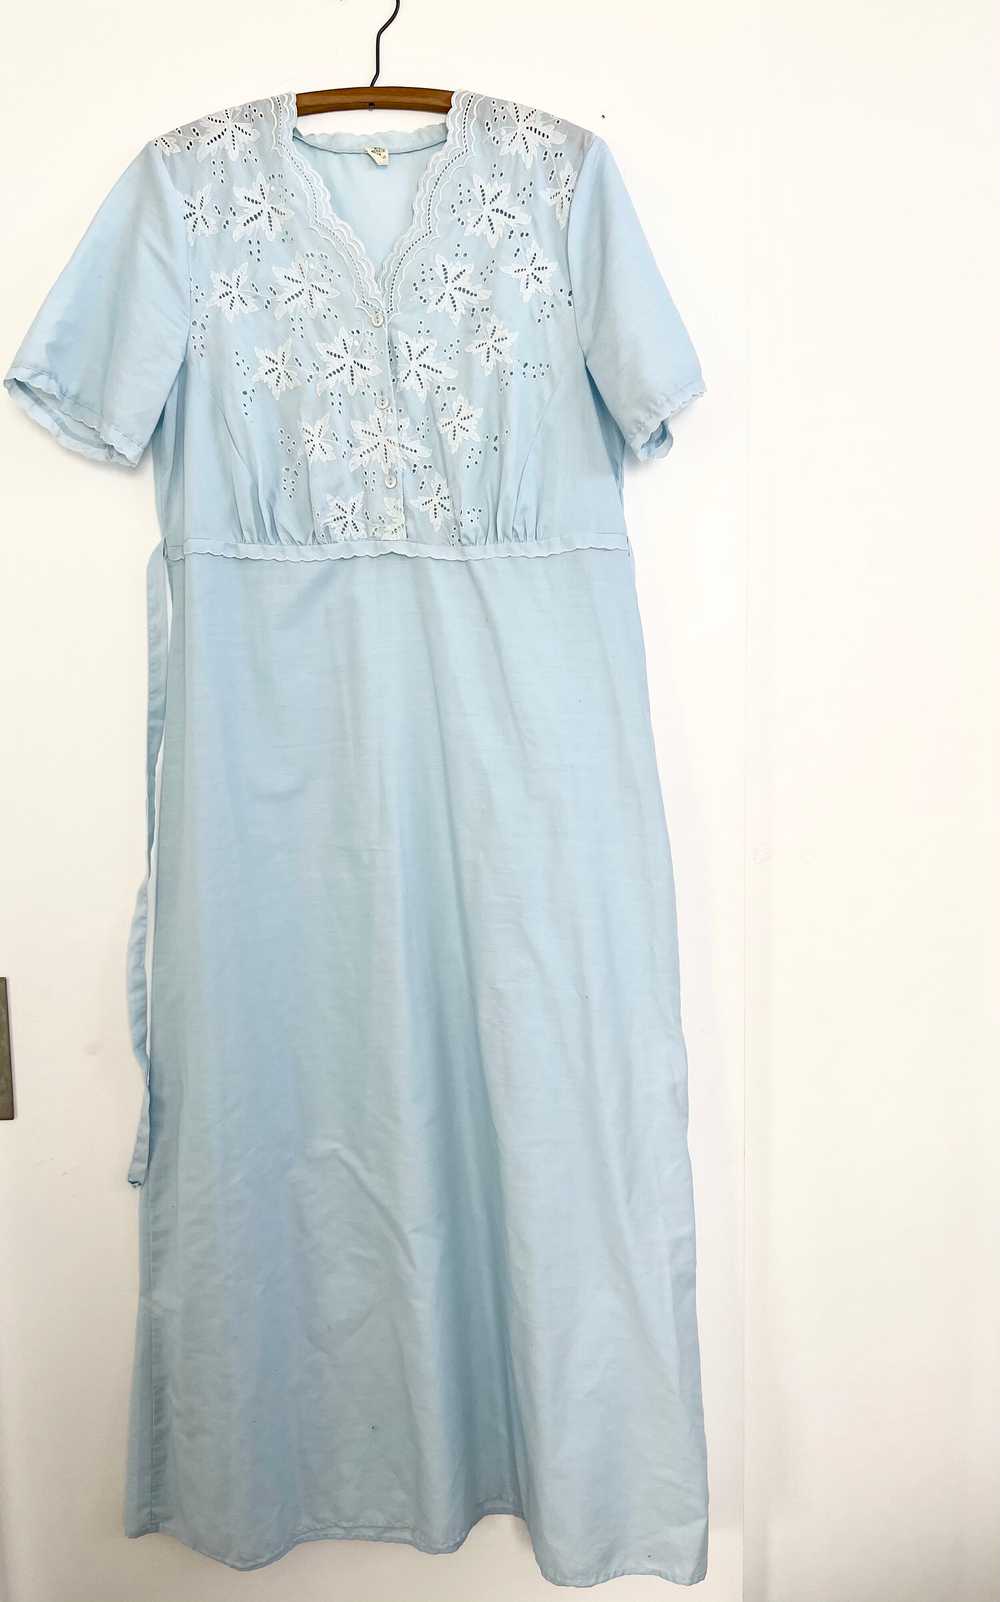 Pale Blue 40's Inspired Dress - image 2